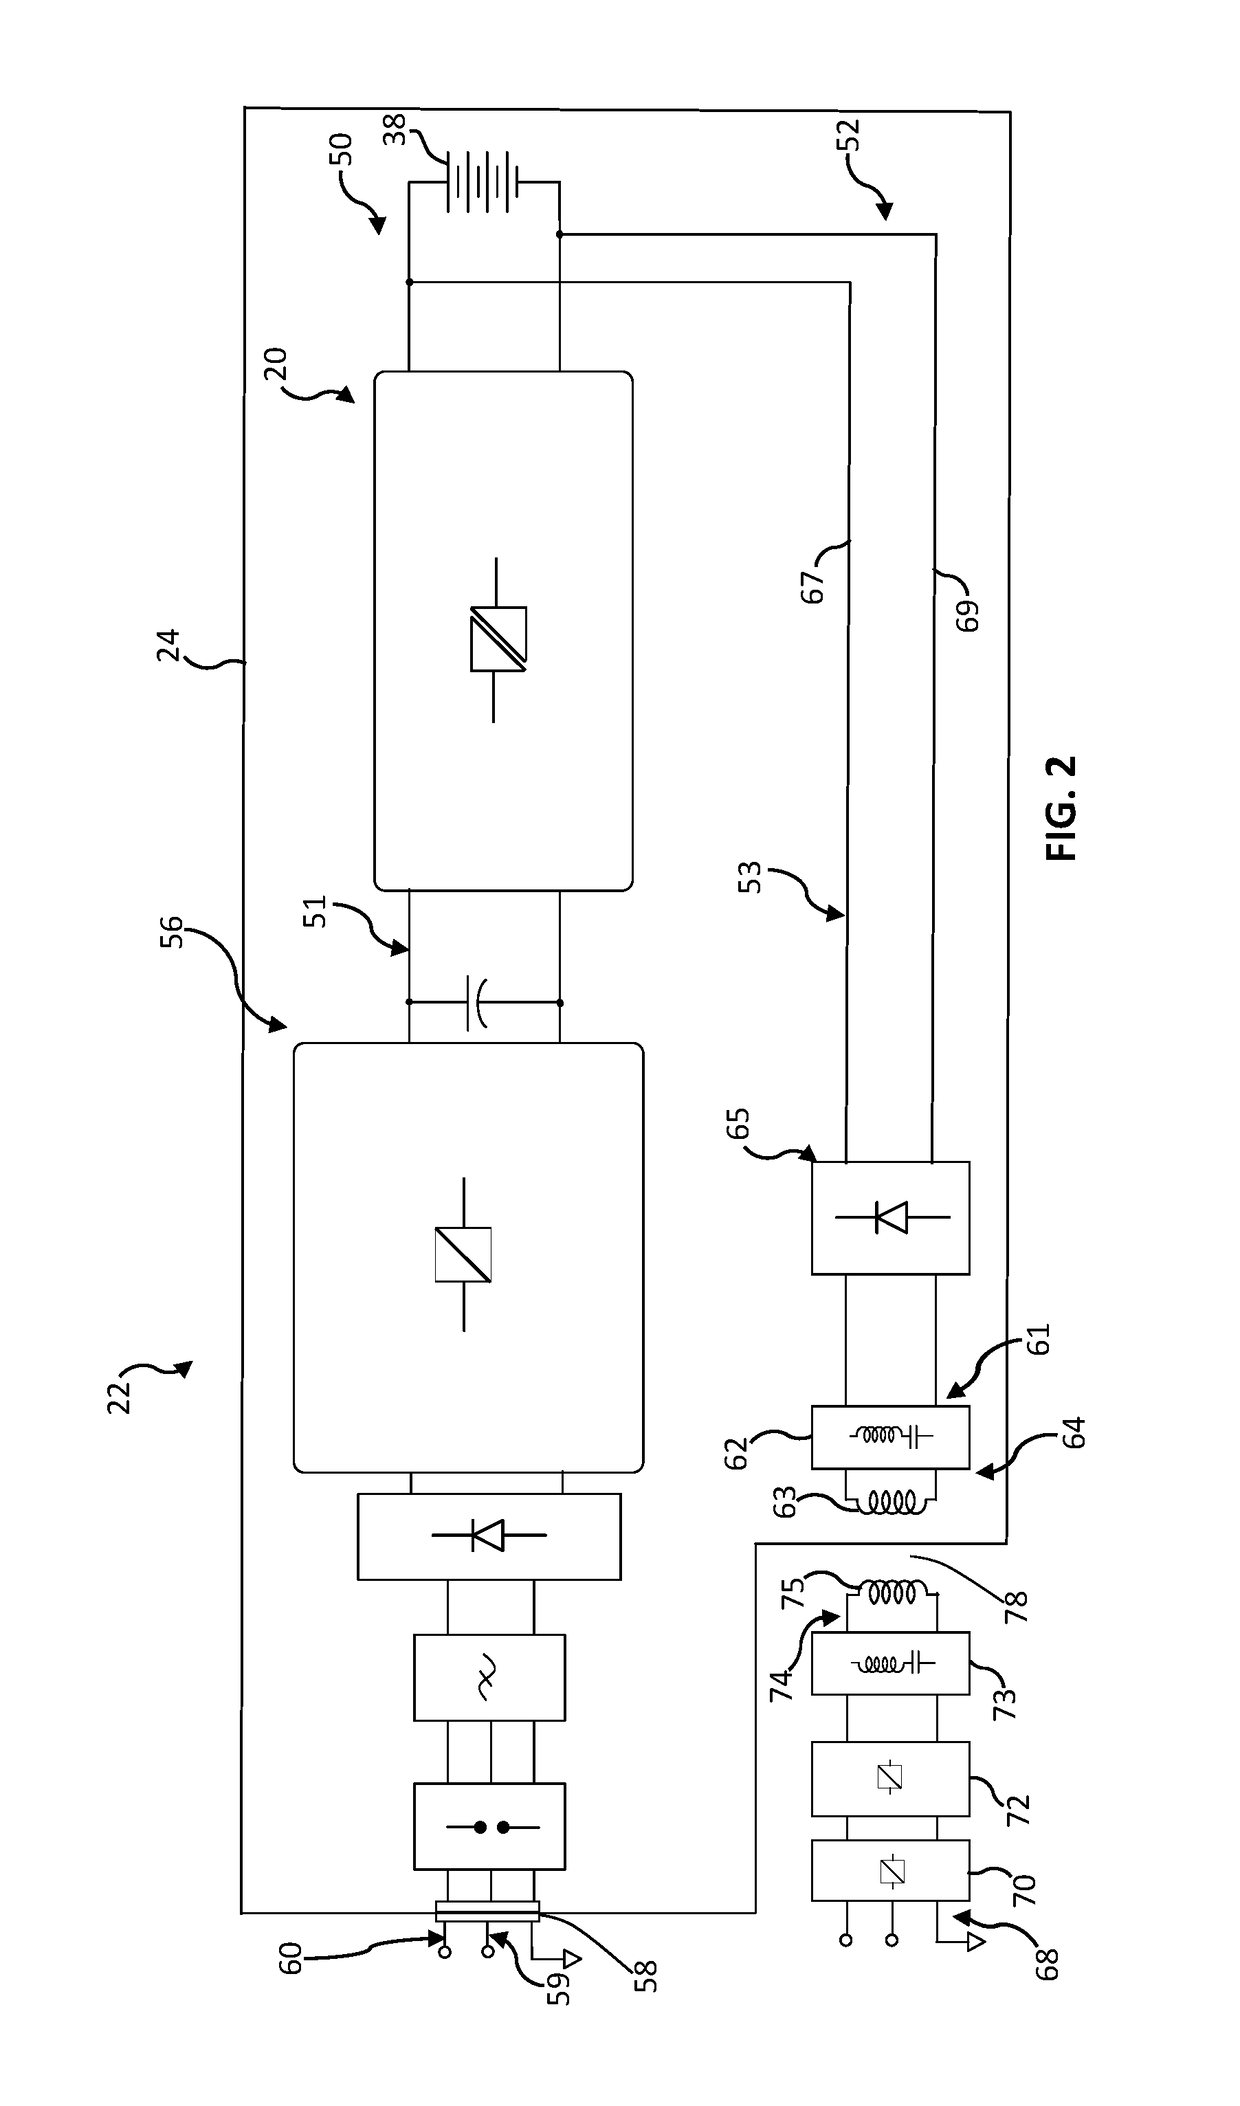 Inductive and conductive onboard charging systems